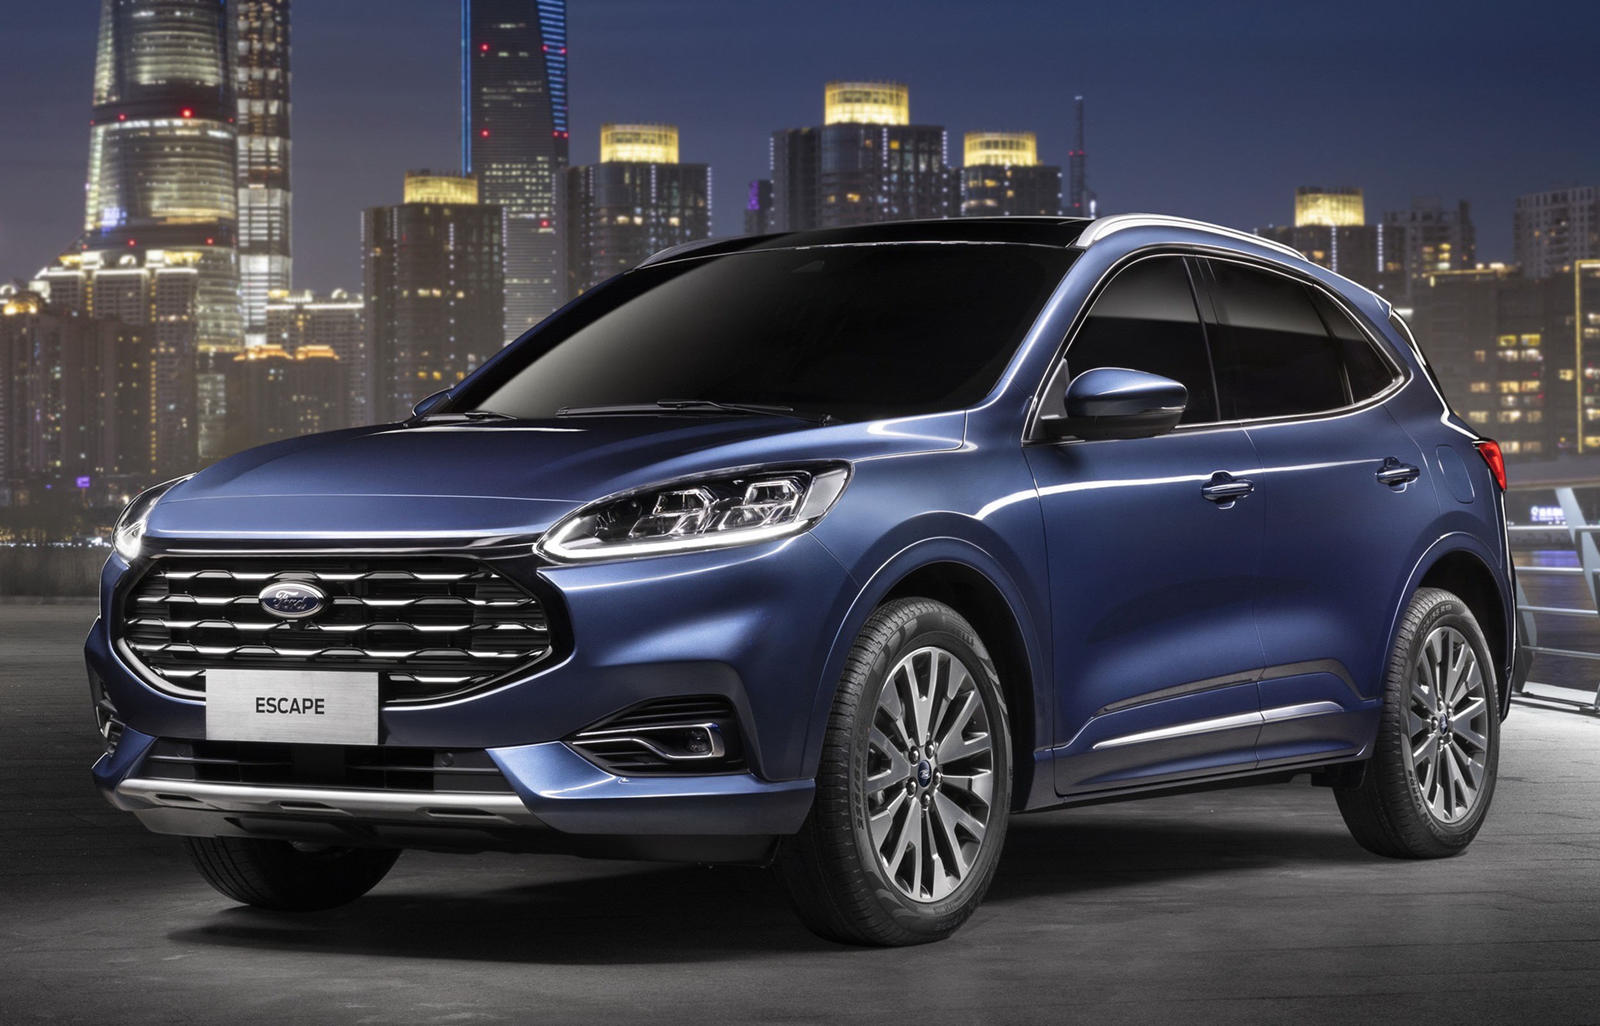 The New Ford Opens Its Mouth Wider In China |